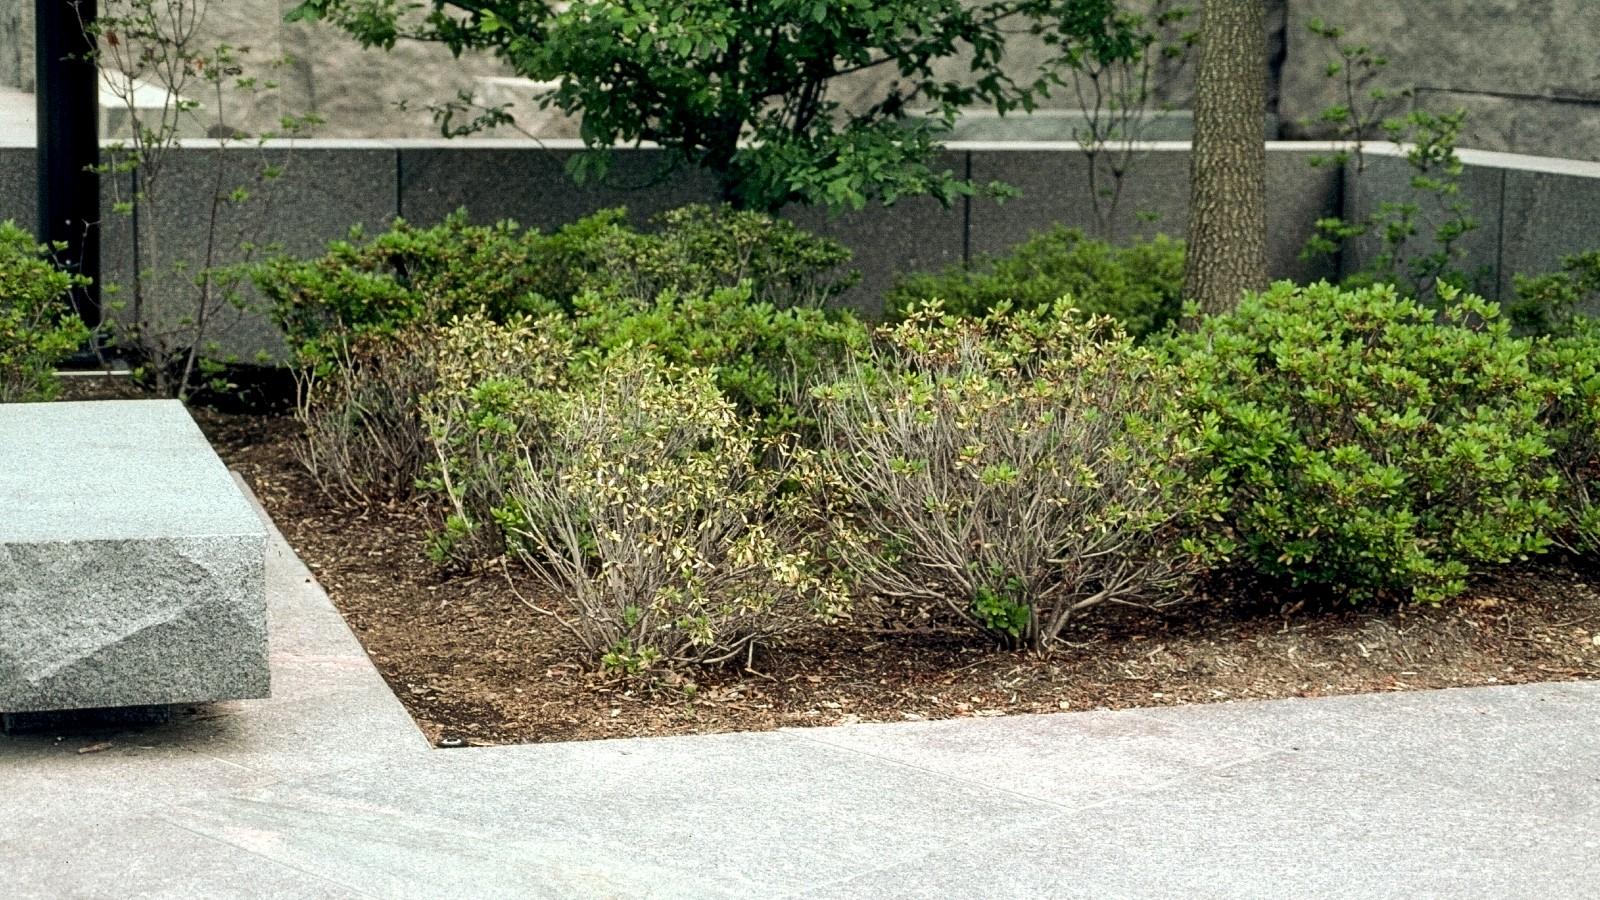 azaleas dying due to poor planting location